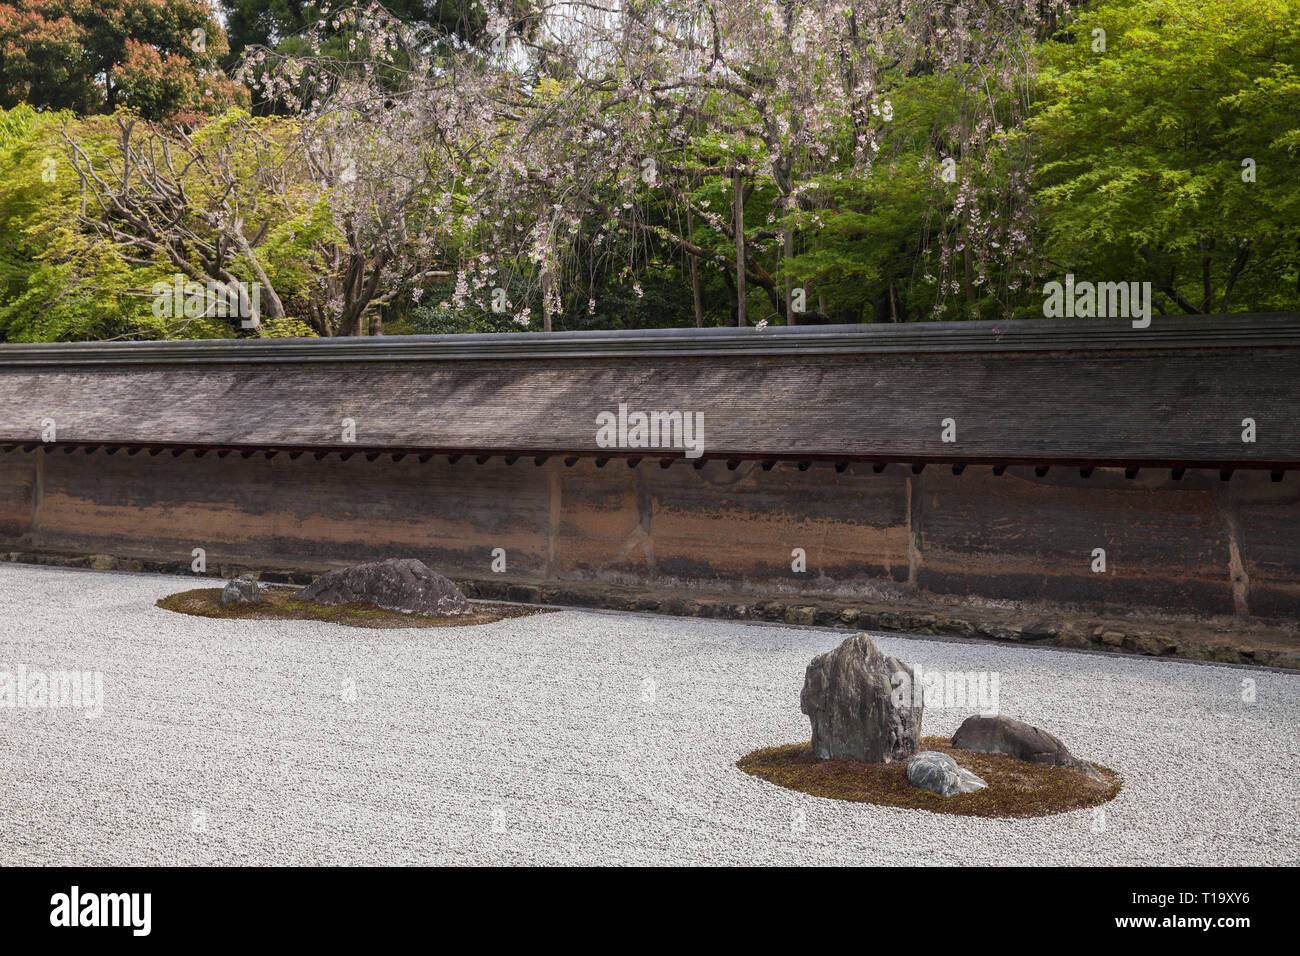 A portion of the Zen rock garden, earthen wall, and flowering trees at Ryōan-ji in Kyoto Stock Photo